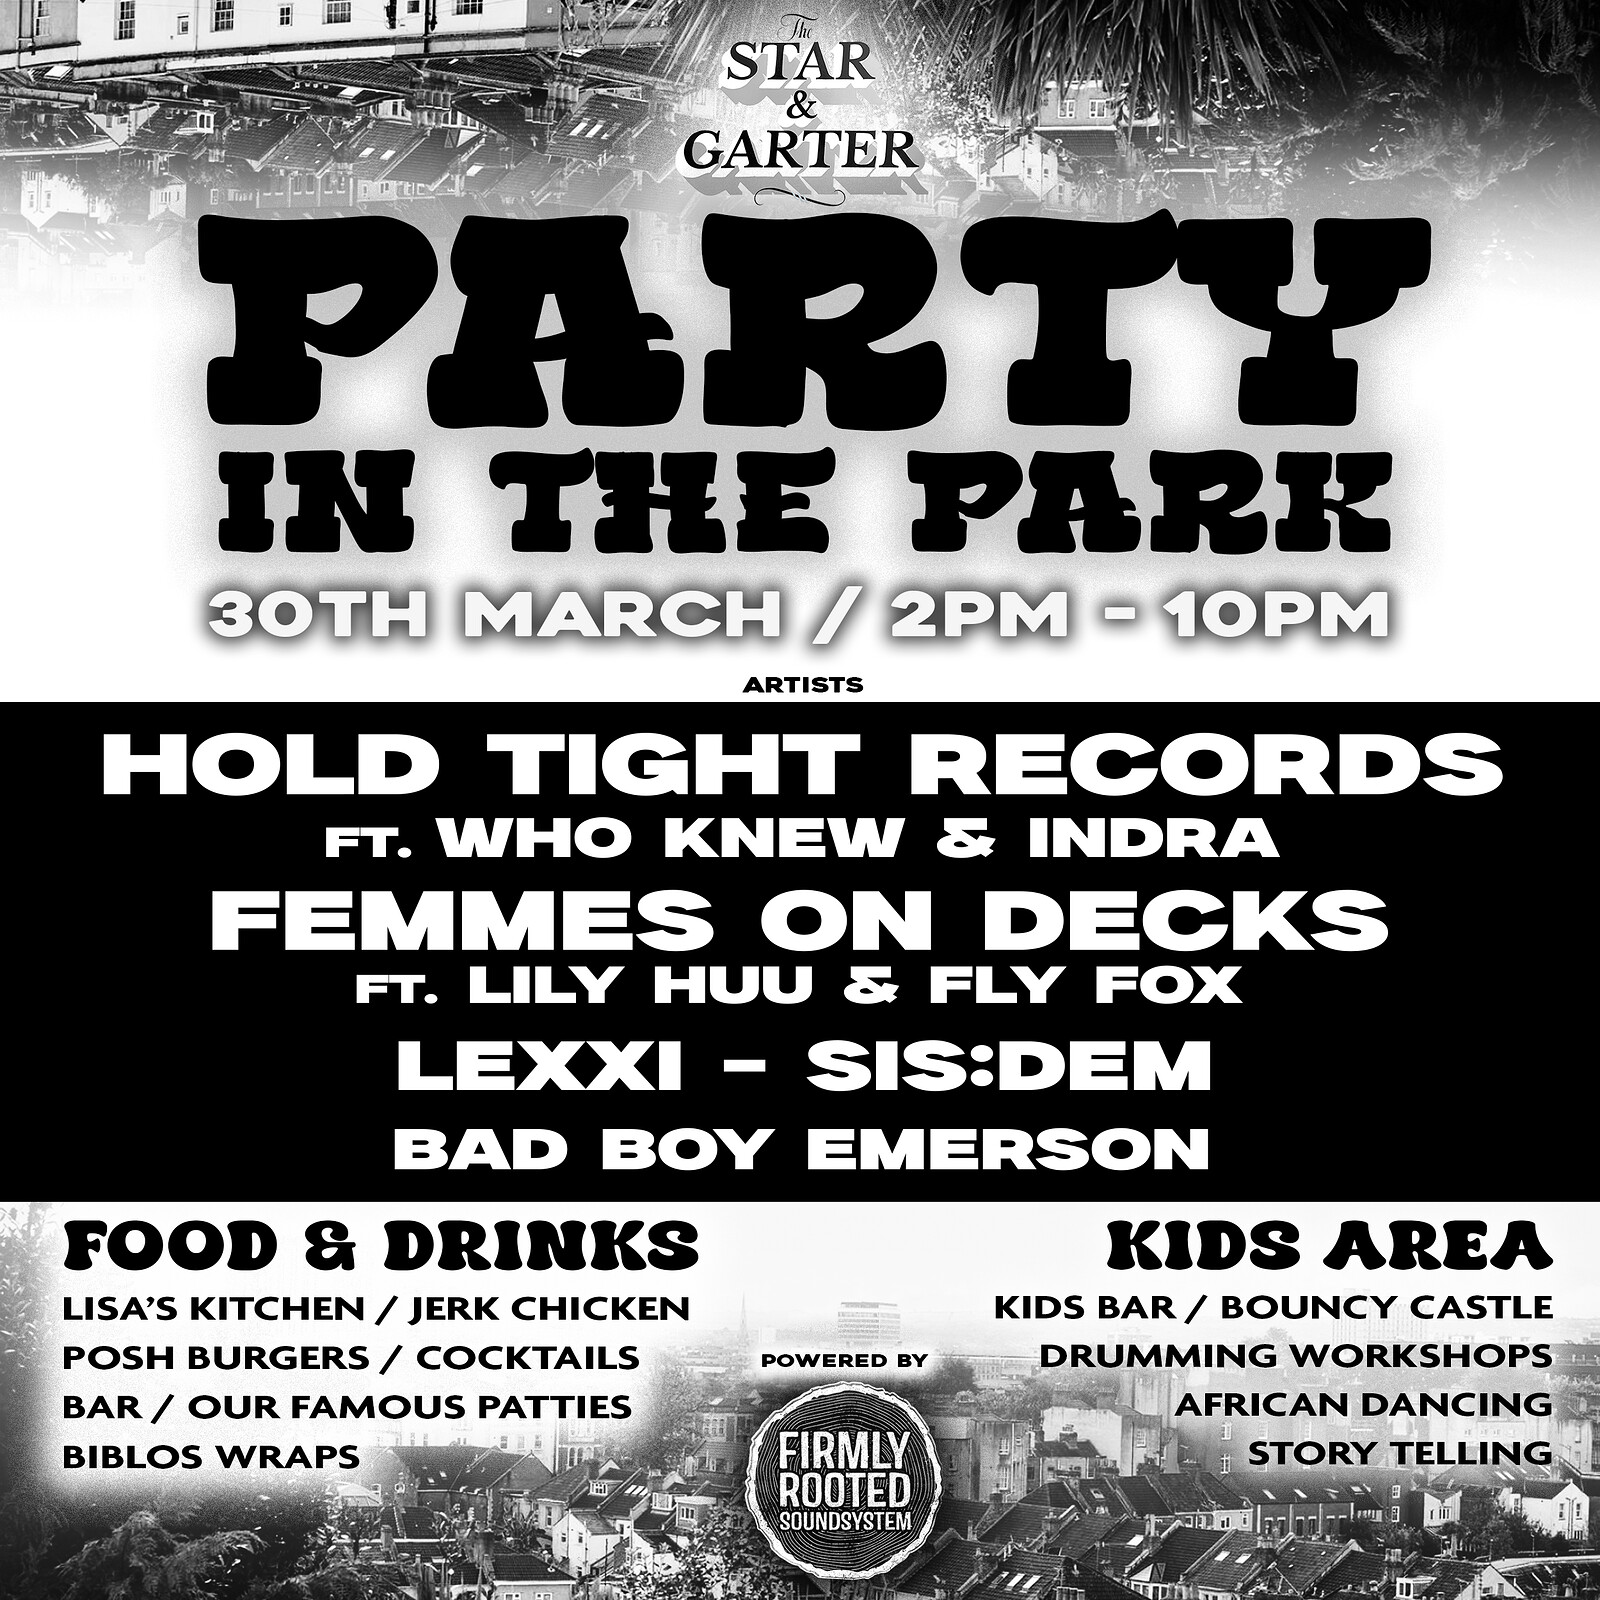 Star & Garter Presents : Party in the Park at Star and Garter